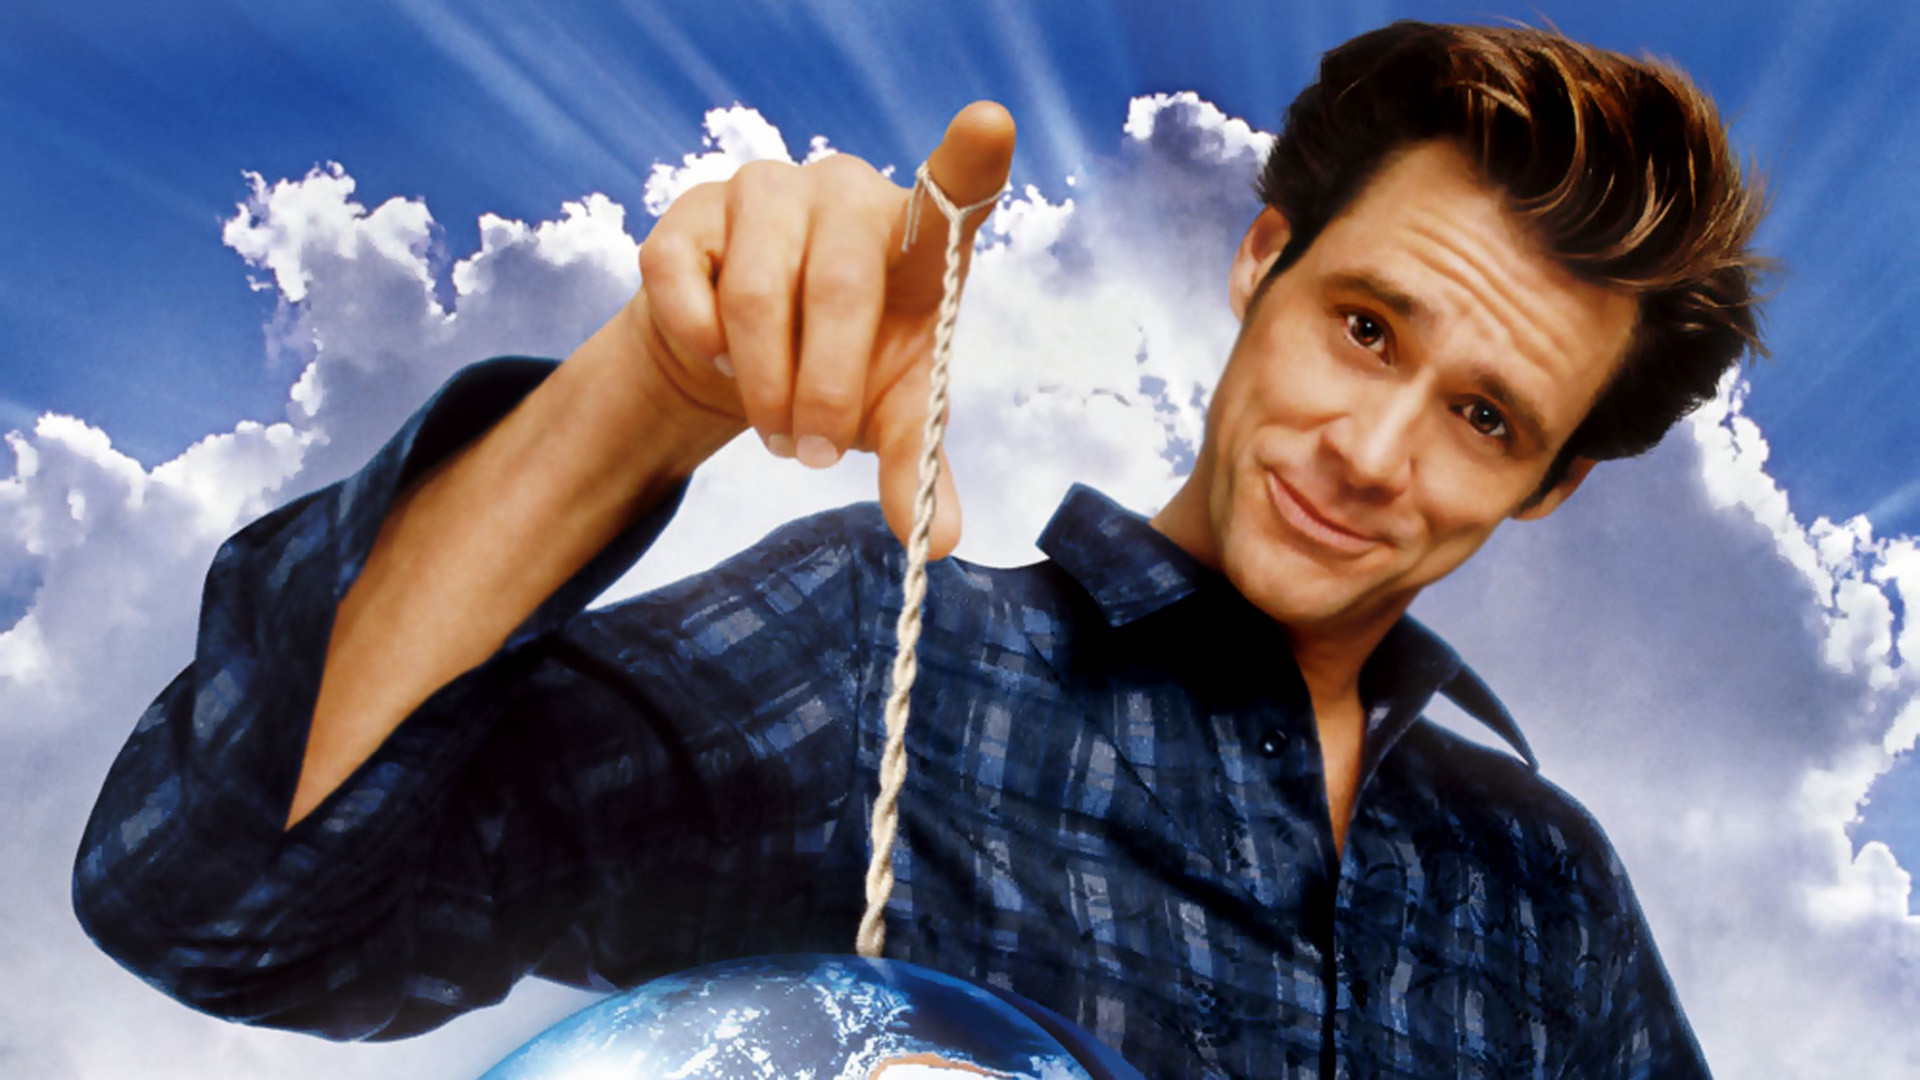 Jim Carrey Says Sequels To 'Bruce Almighty,' 'Dumb & Dumber' Possible